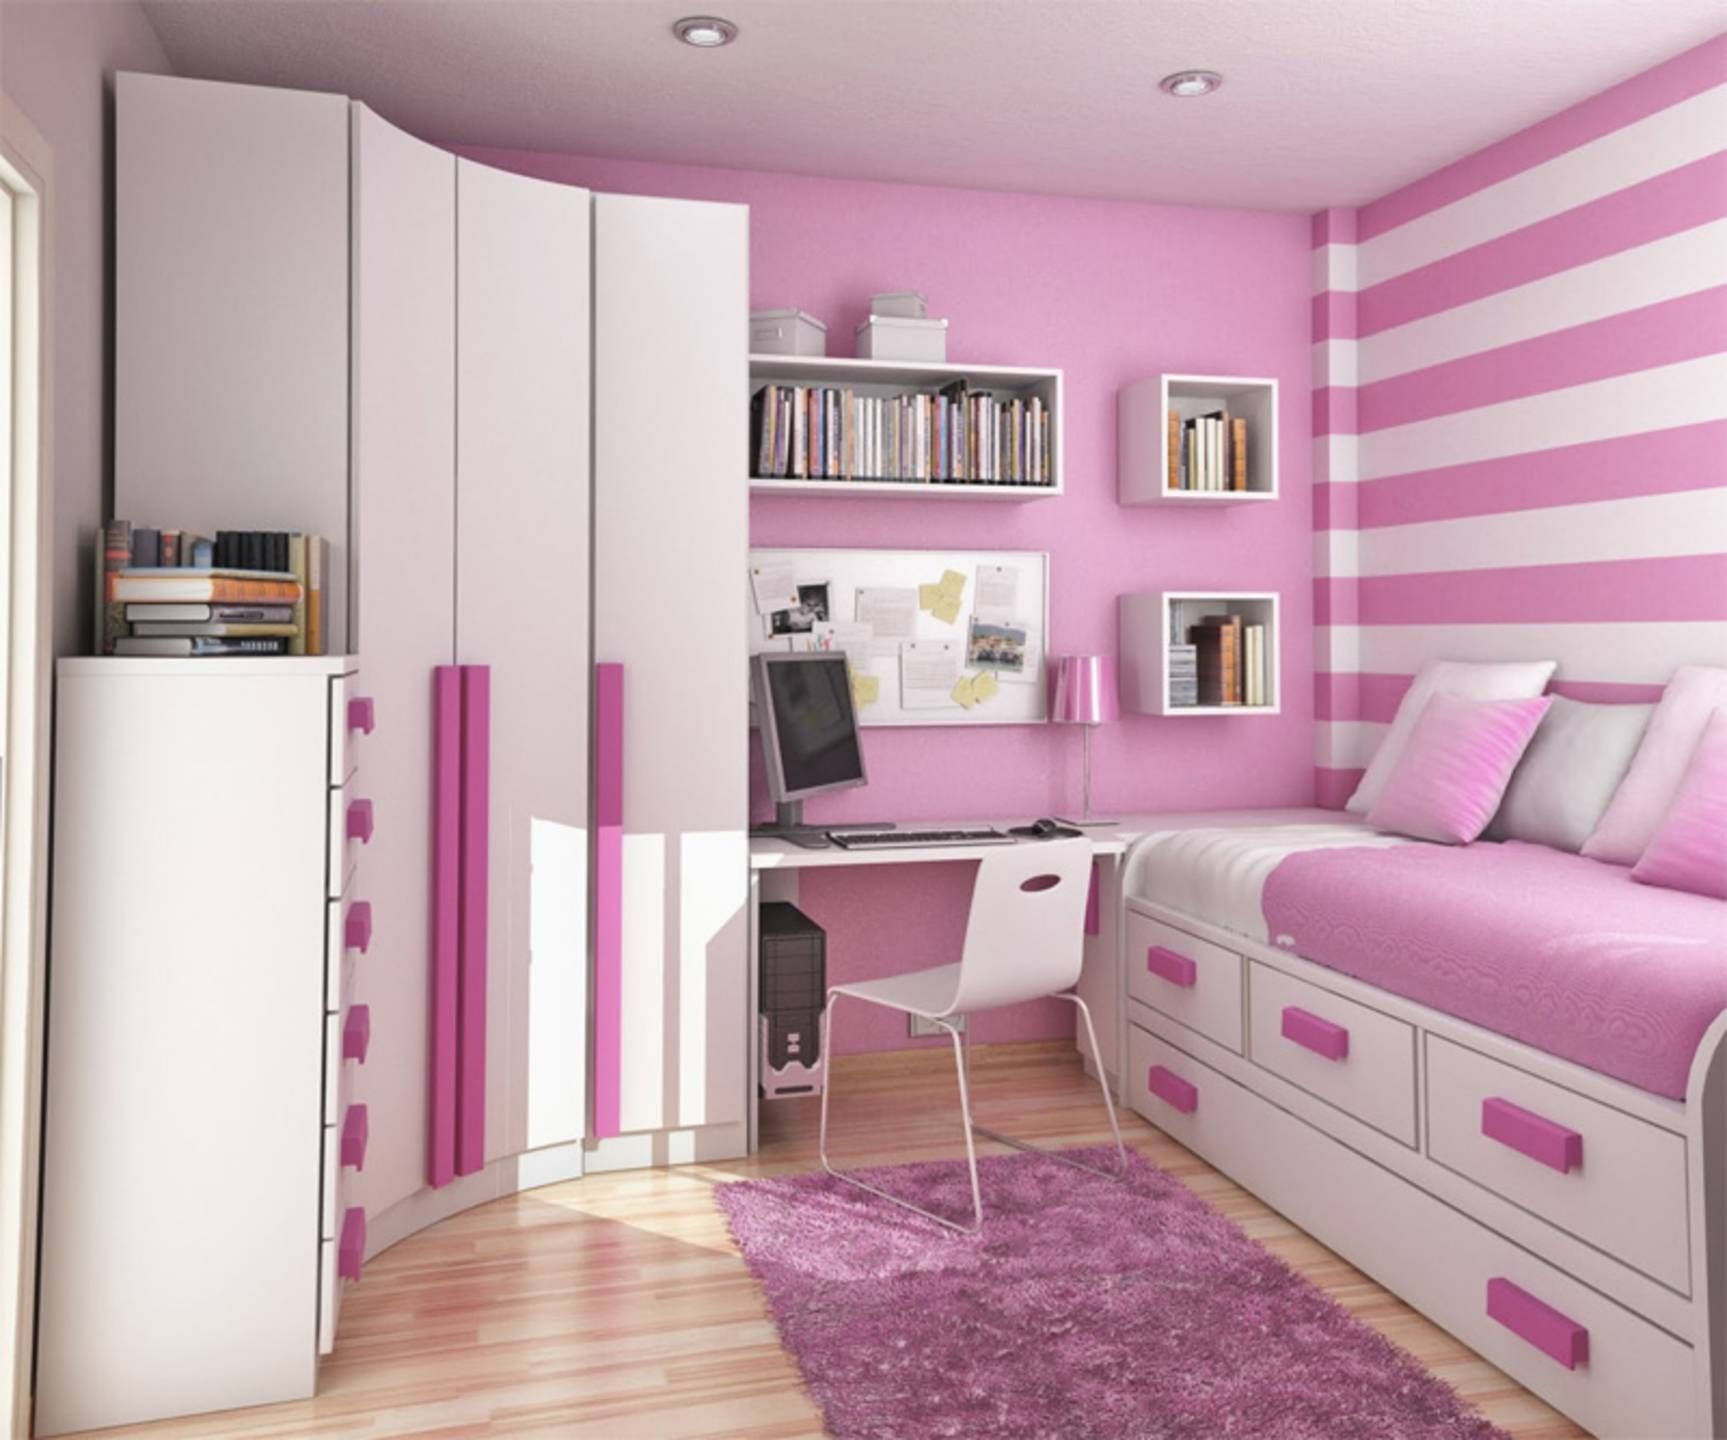 White Wooden Corner Wardrobe With Pink Handles Connectedpink With Regard To Childrens Pink Wardrobes (View 7 of 30)